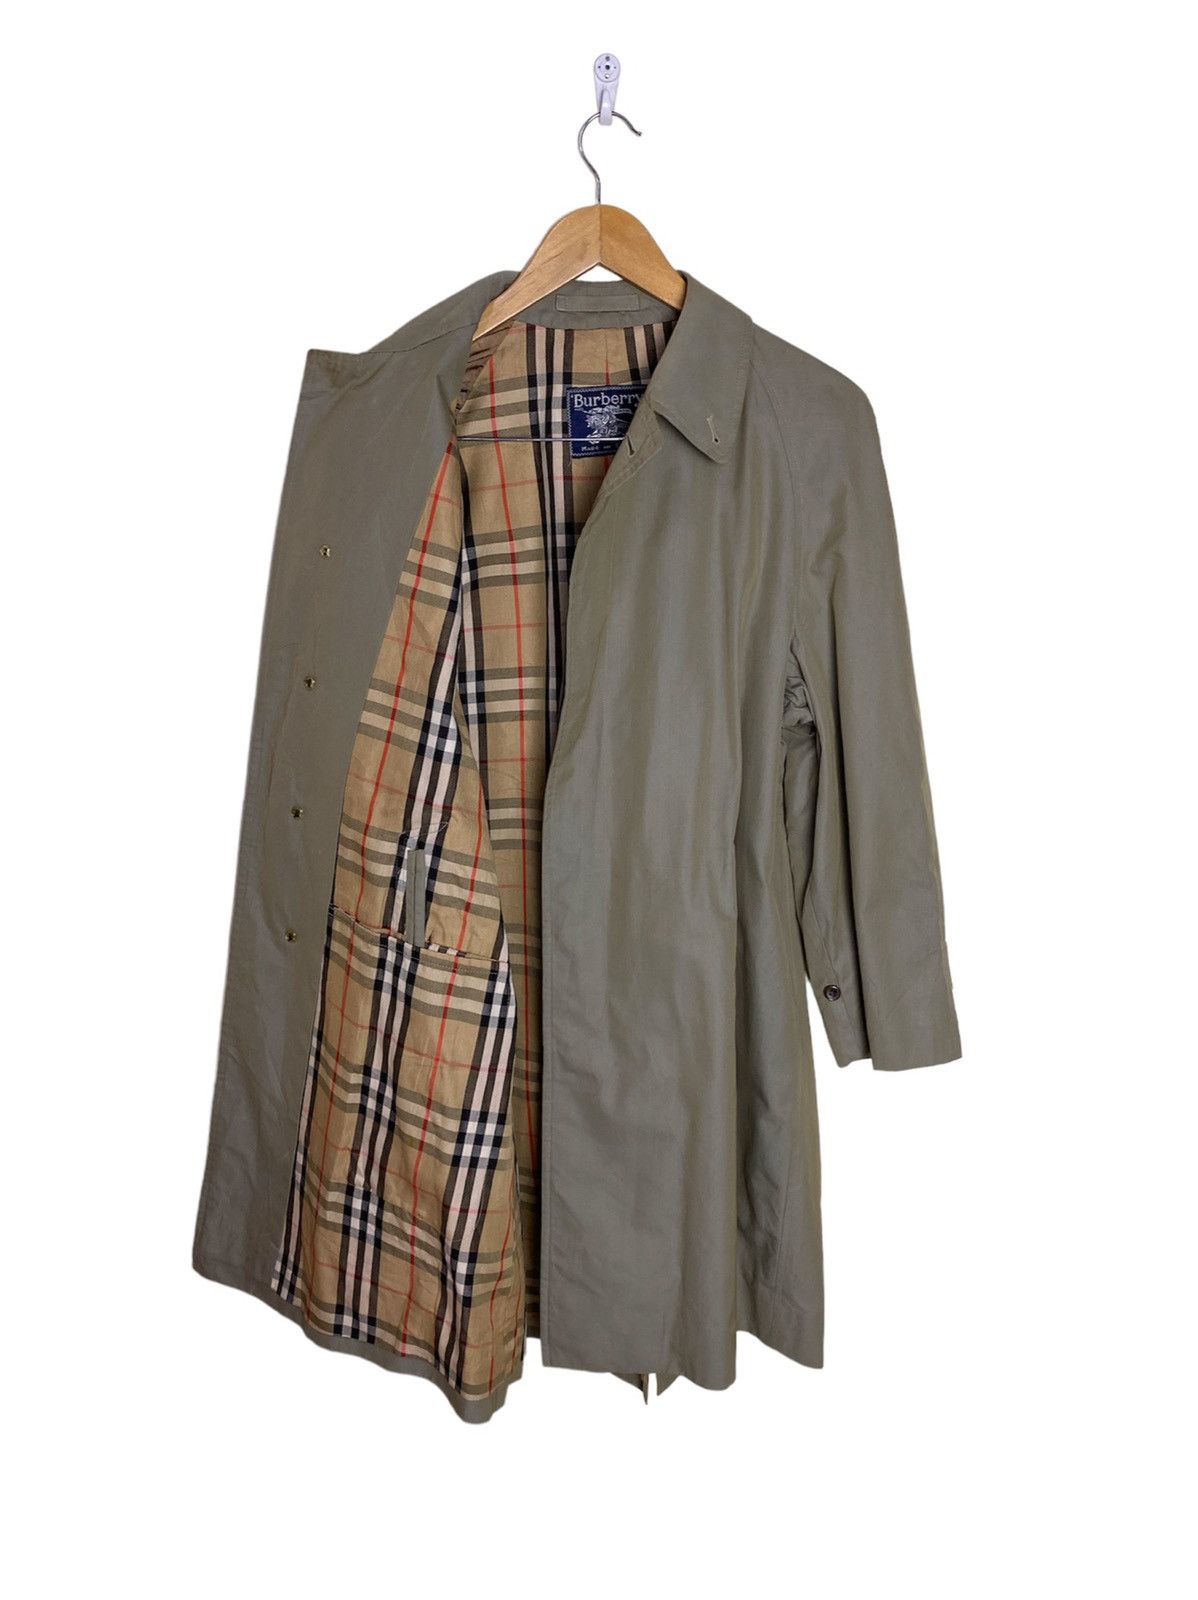 Burberry Prorsum - Vintage Burberry Trench Coat Jacket Made in England - 1